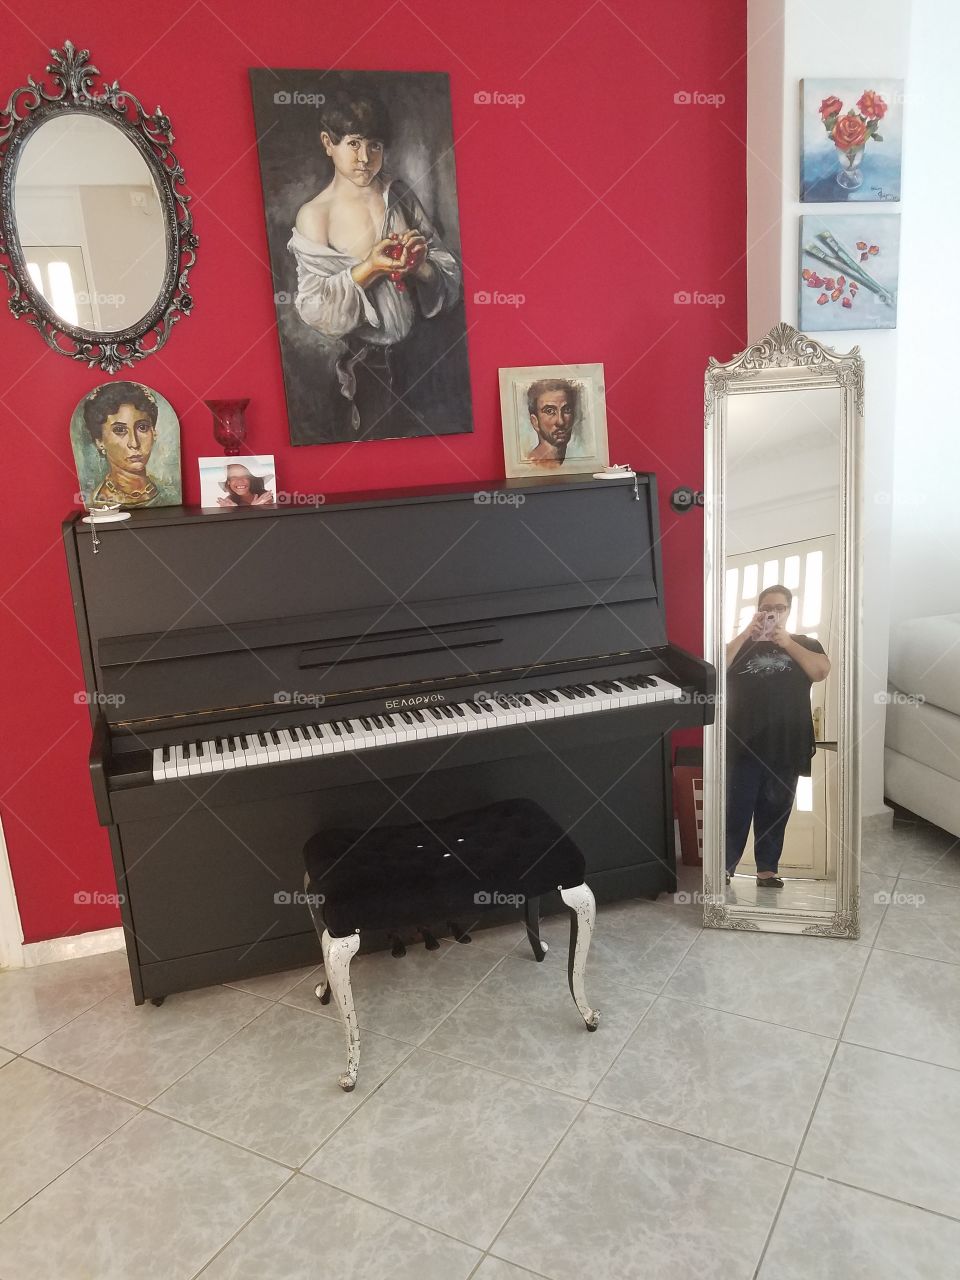 A black piano with several pieces of art depicted on a red wall. The floor is made of marble.